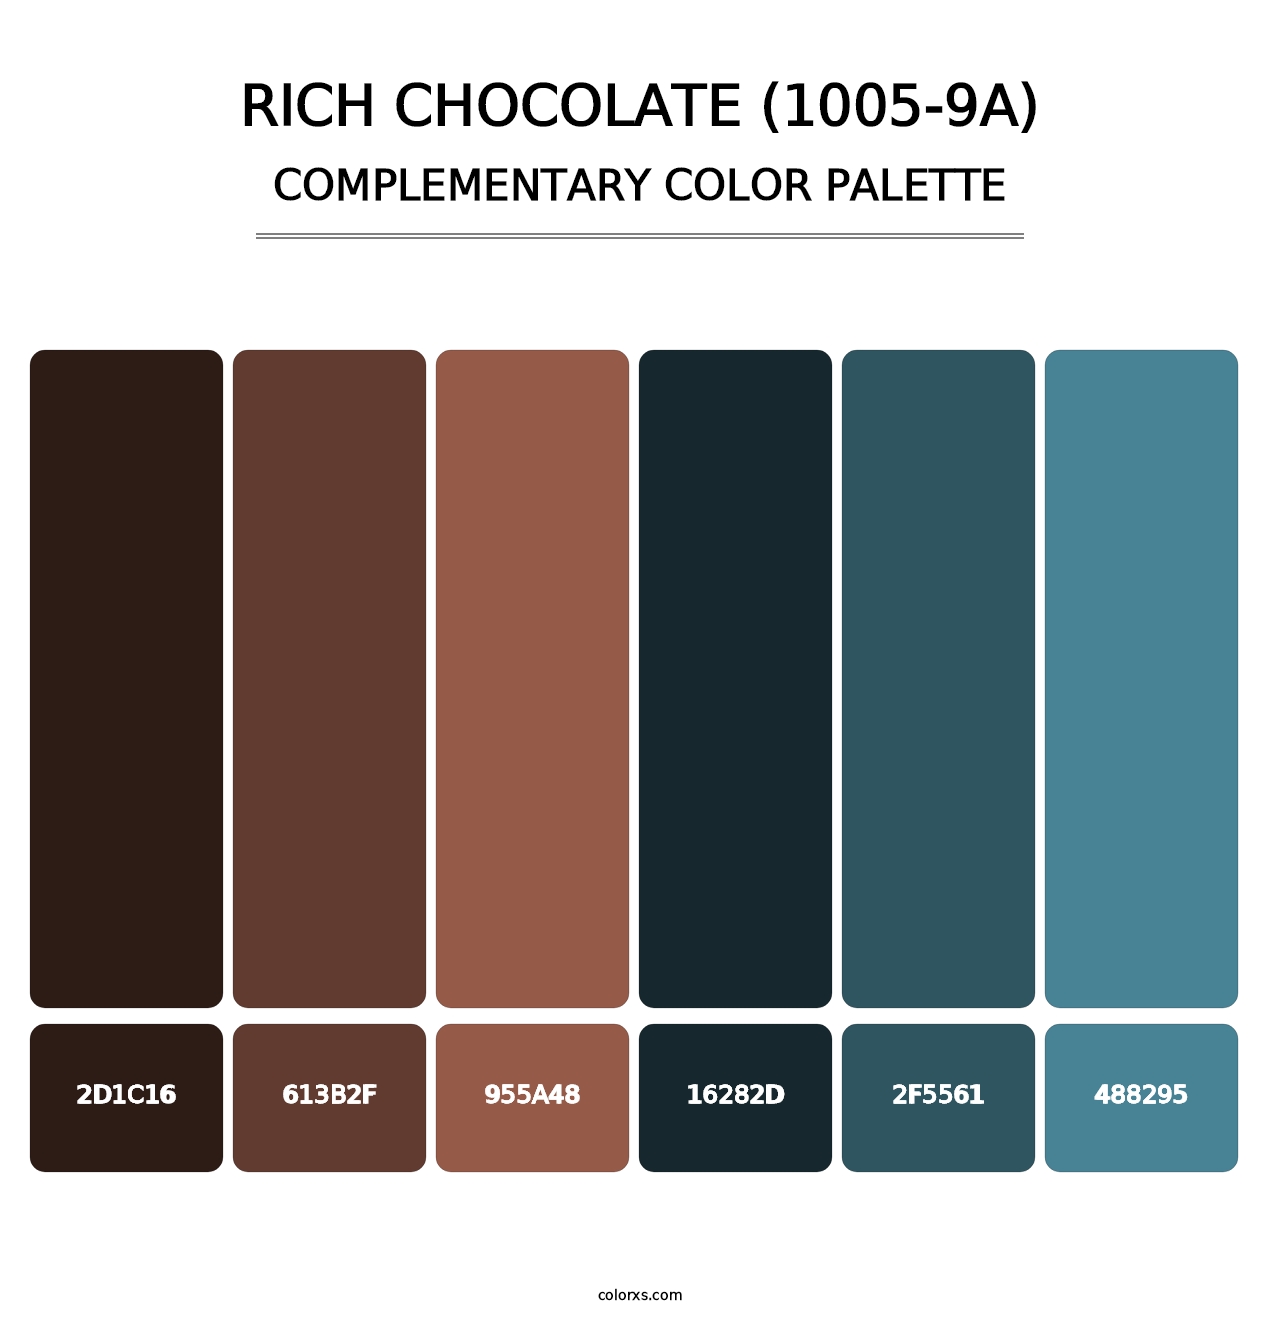 Rich Chocolate (1005-9A) - Complementary Color Palette